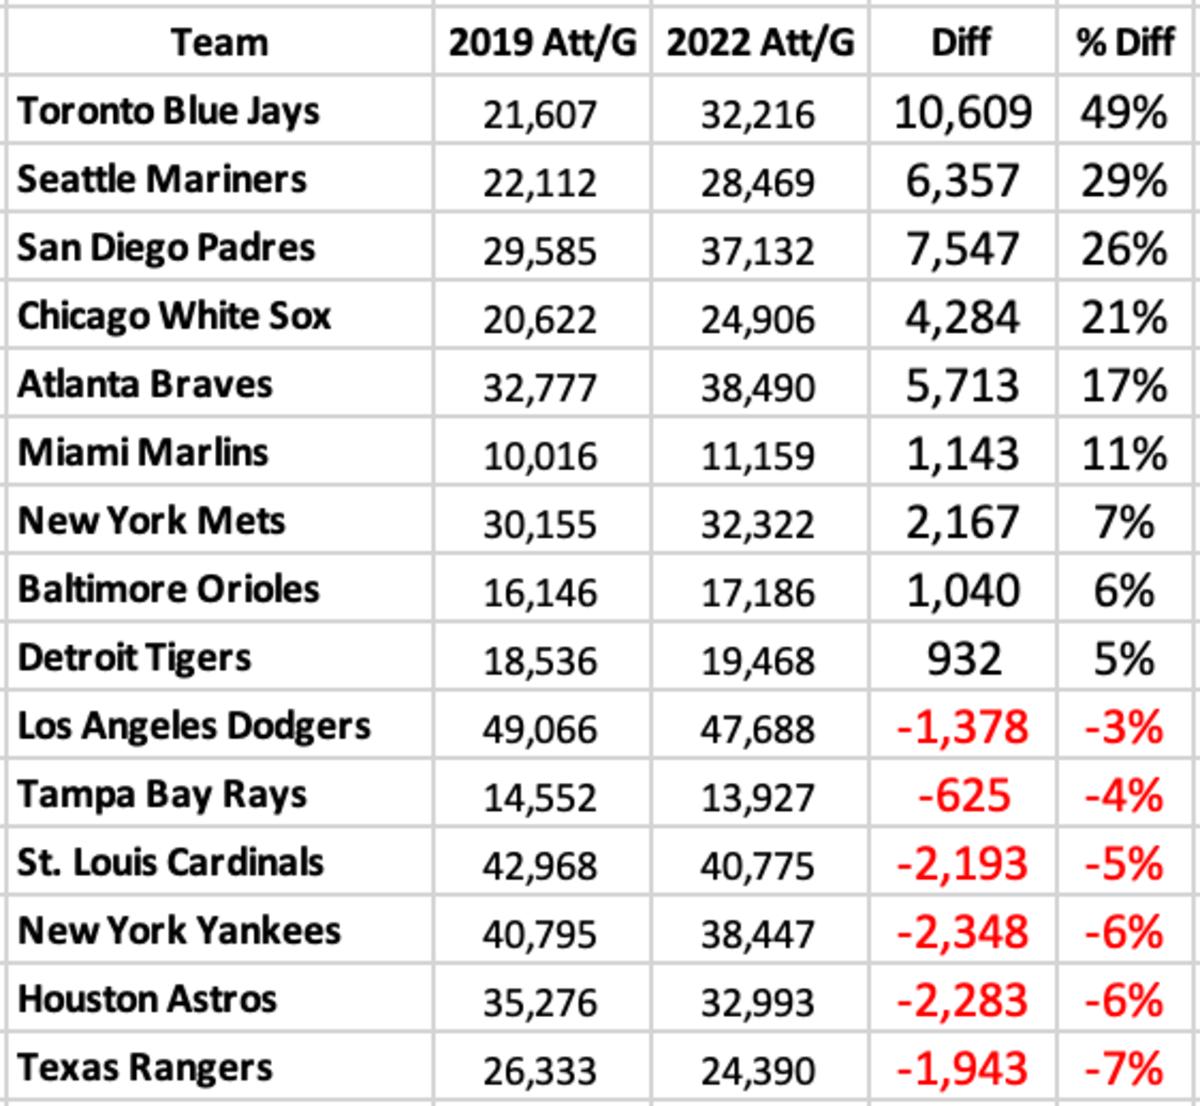 Top 15 MLB teams in Per Game Attendance Growth 2022 vs 2019